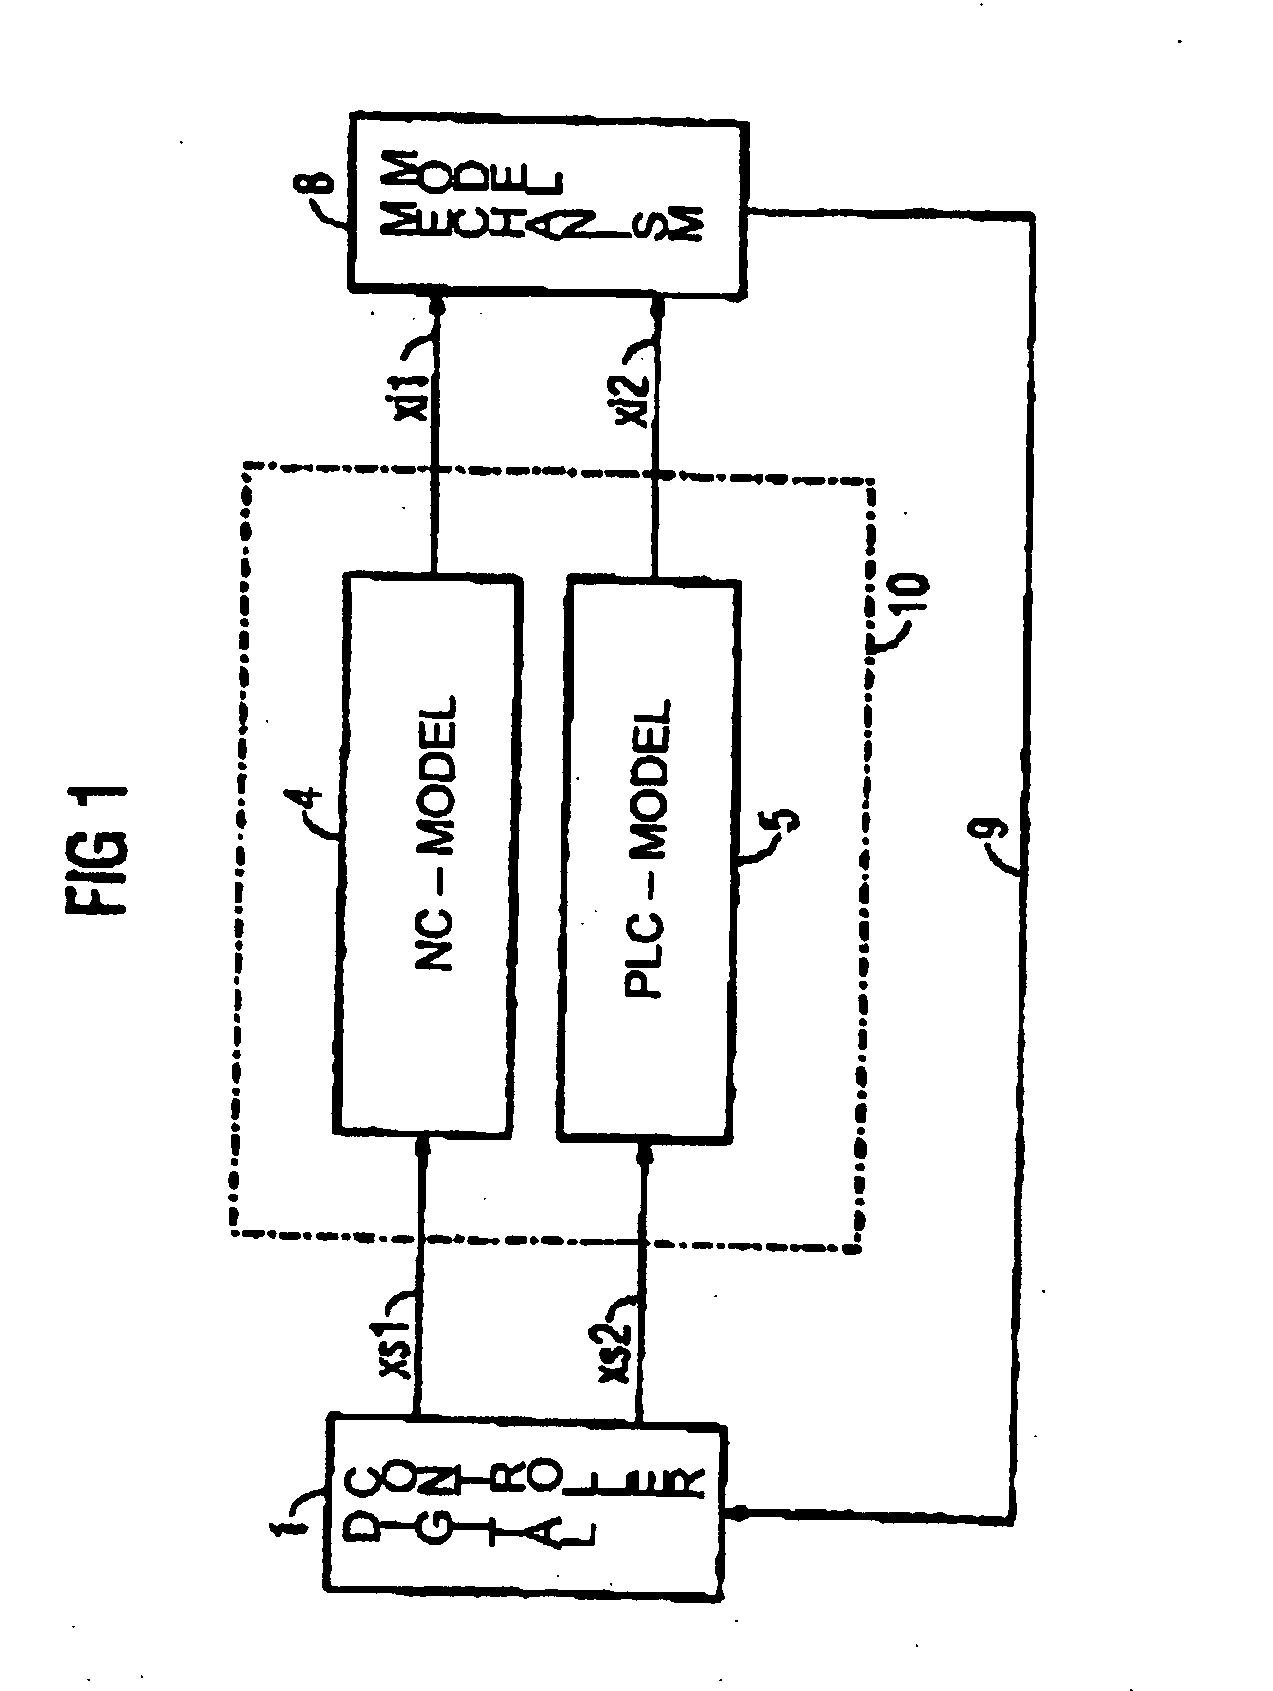 Apparatus and method for simulation of the control and machine behavior of machine tools and production-line machines